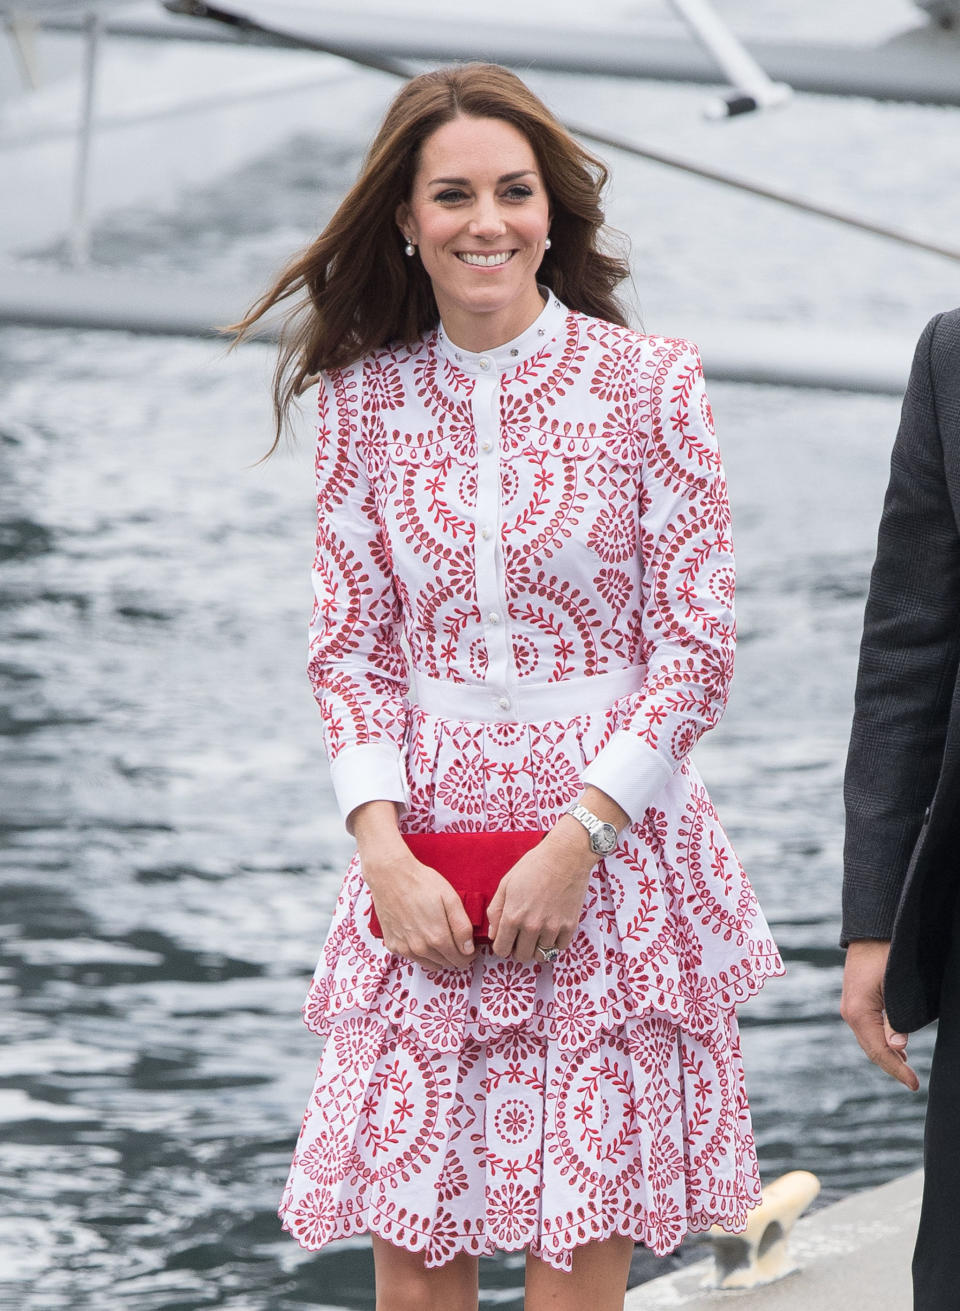 <p>The Royal Family is currently visiting Canada for an eight-day tour, which means eight days of the Duchess' incredibly chic outfits. Click through to see all of Kate Middleton's best looks from her visit. </p>